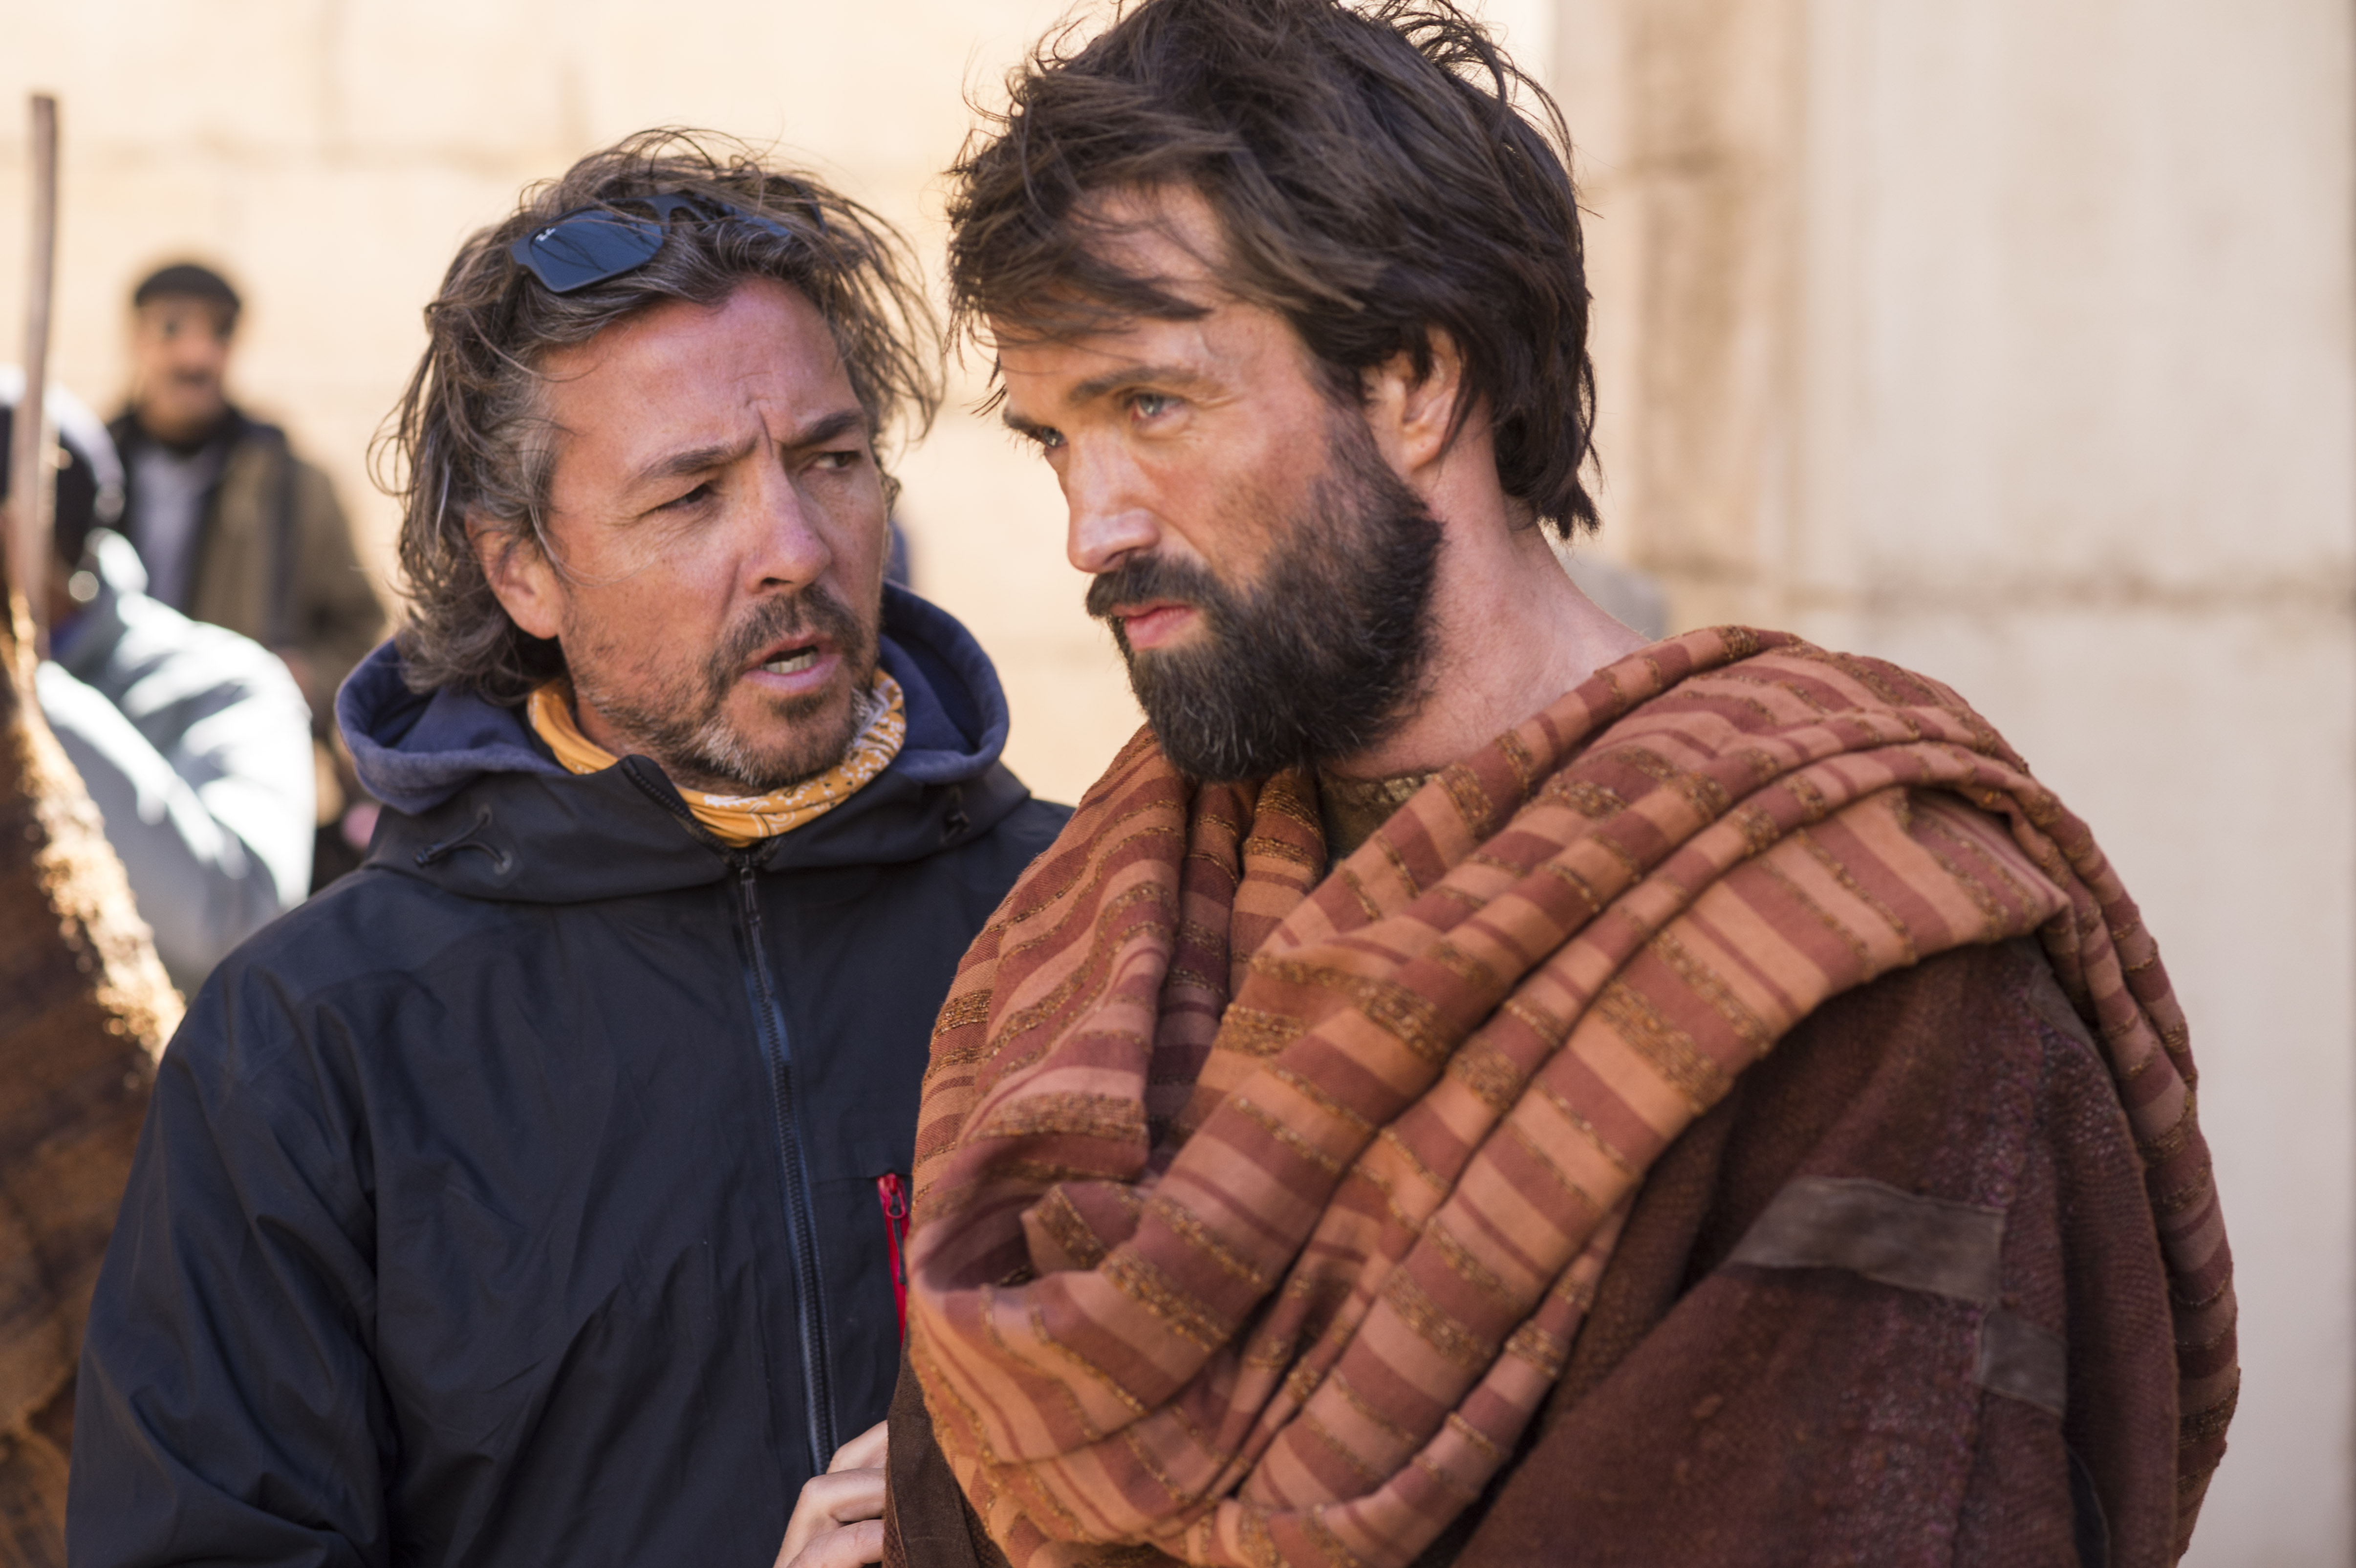 Tony Mitchell with Emmett Scanlan as Saul/Paul in A.D. The Bible Continues